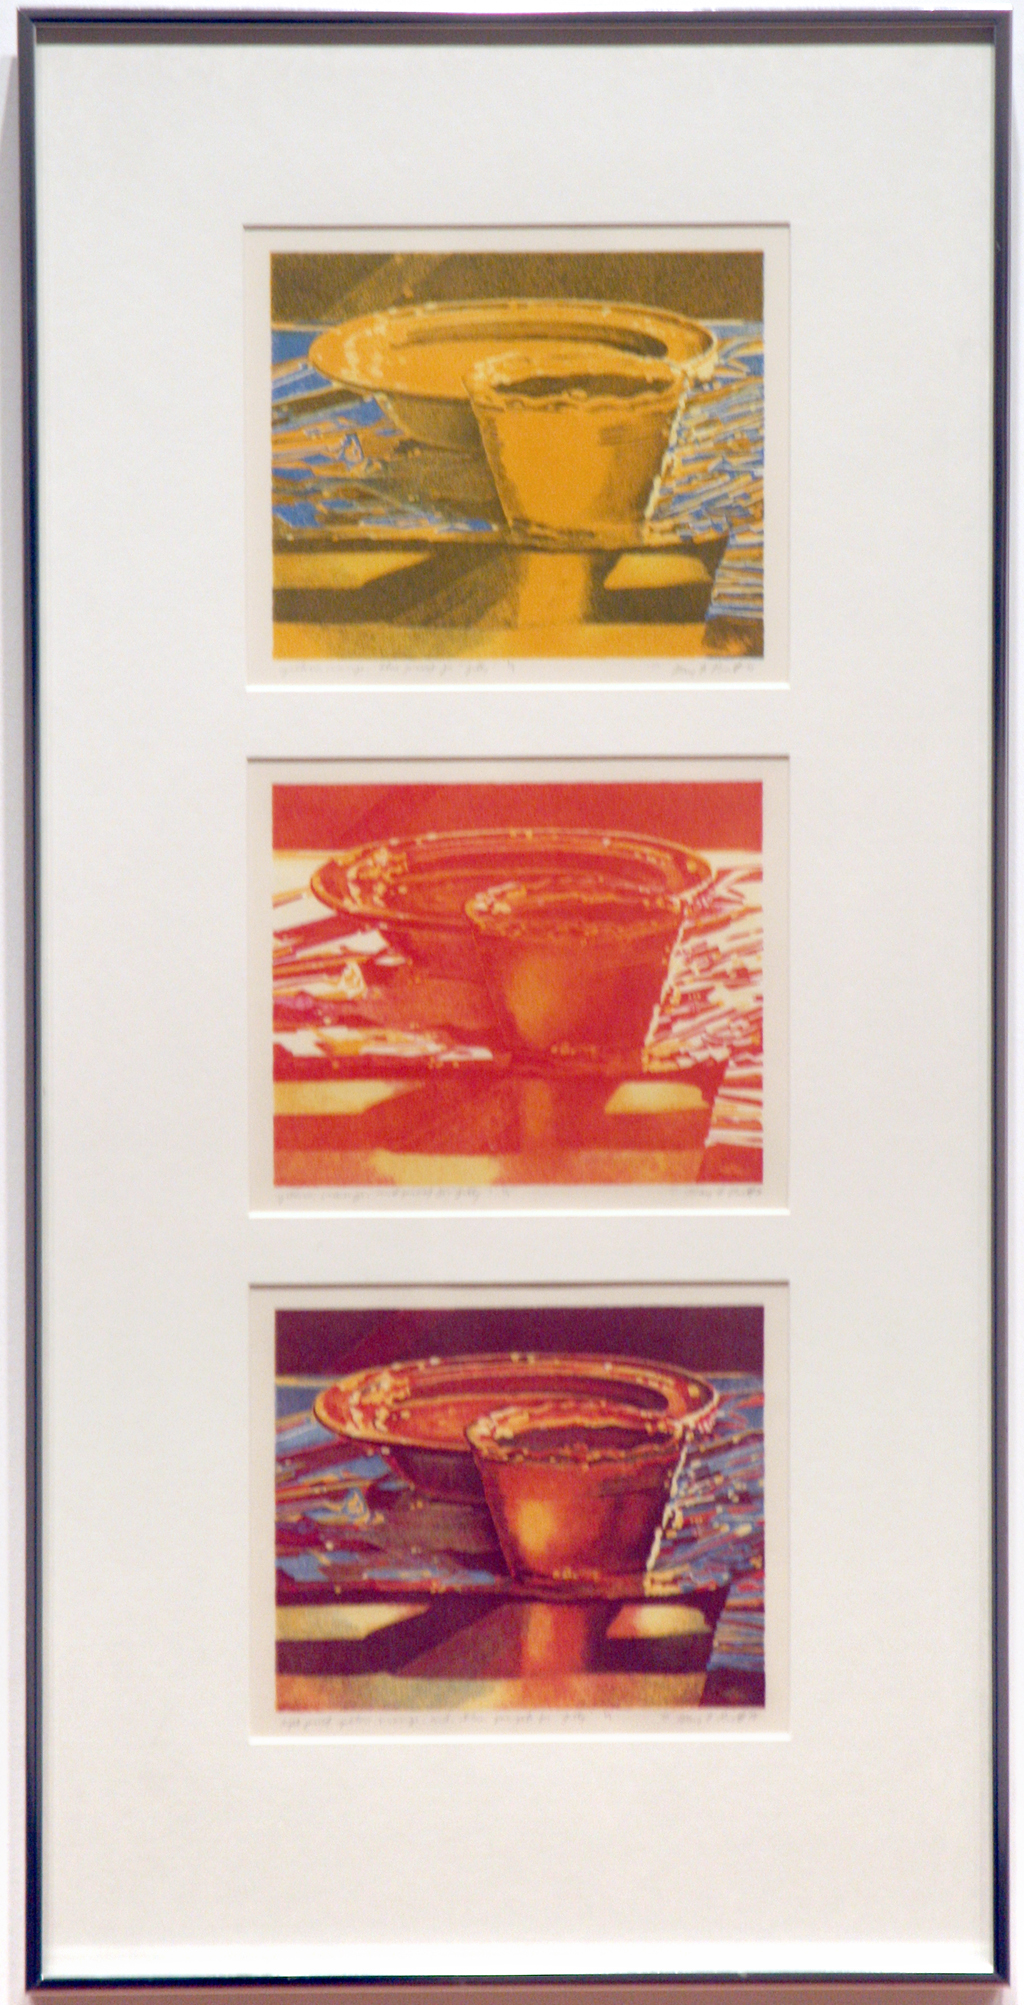 Mary Pratt, Jelly, 1978, hand pulled lithograph, three colour proofs